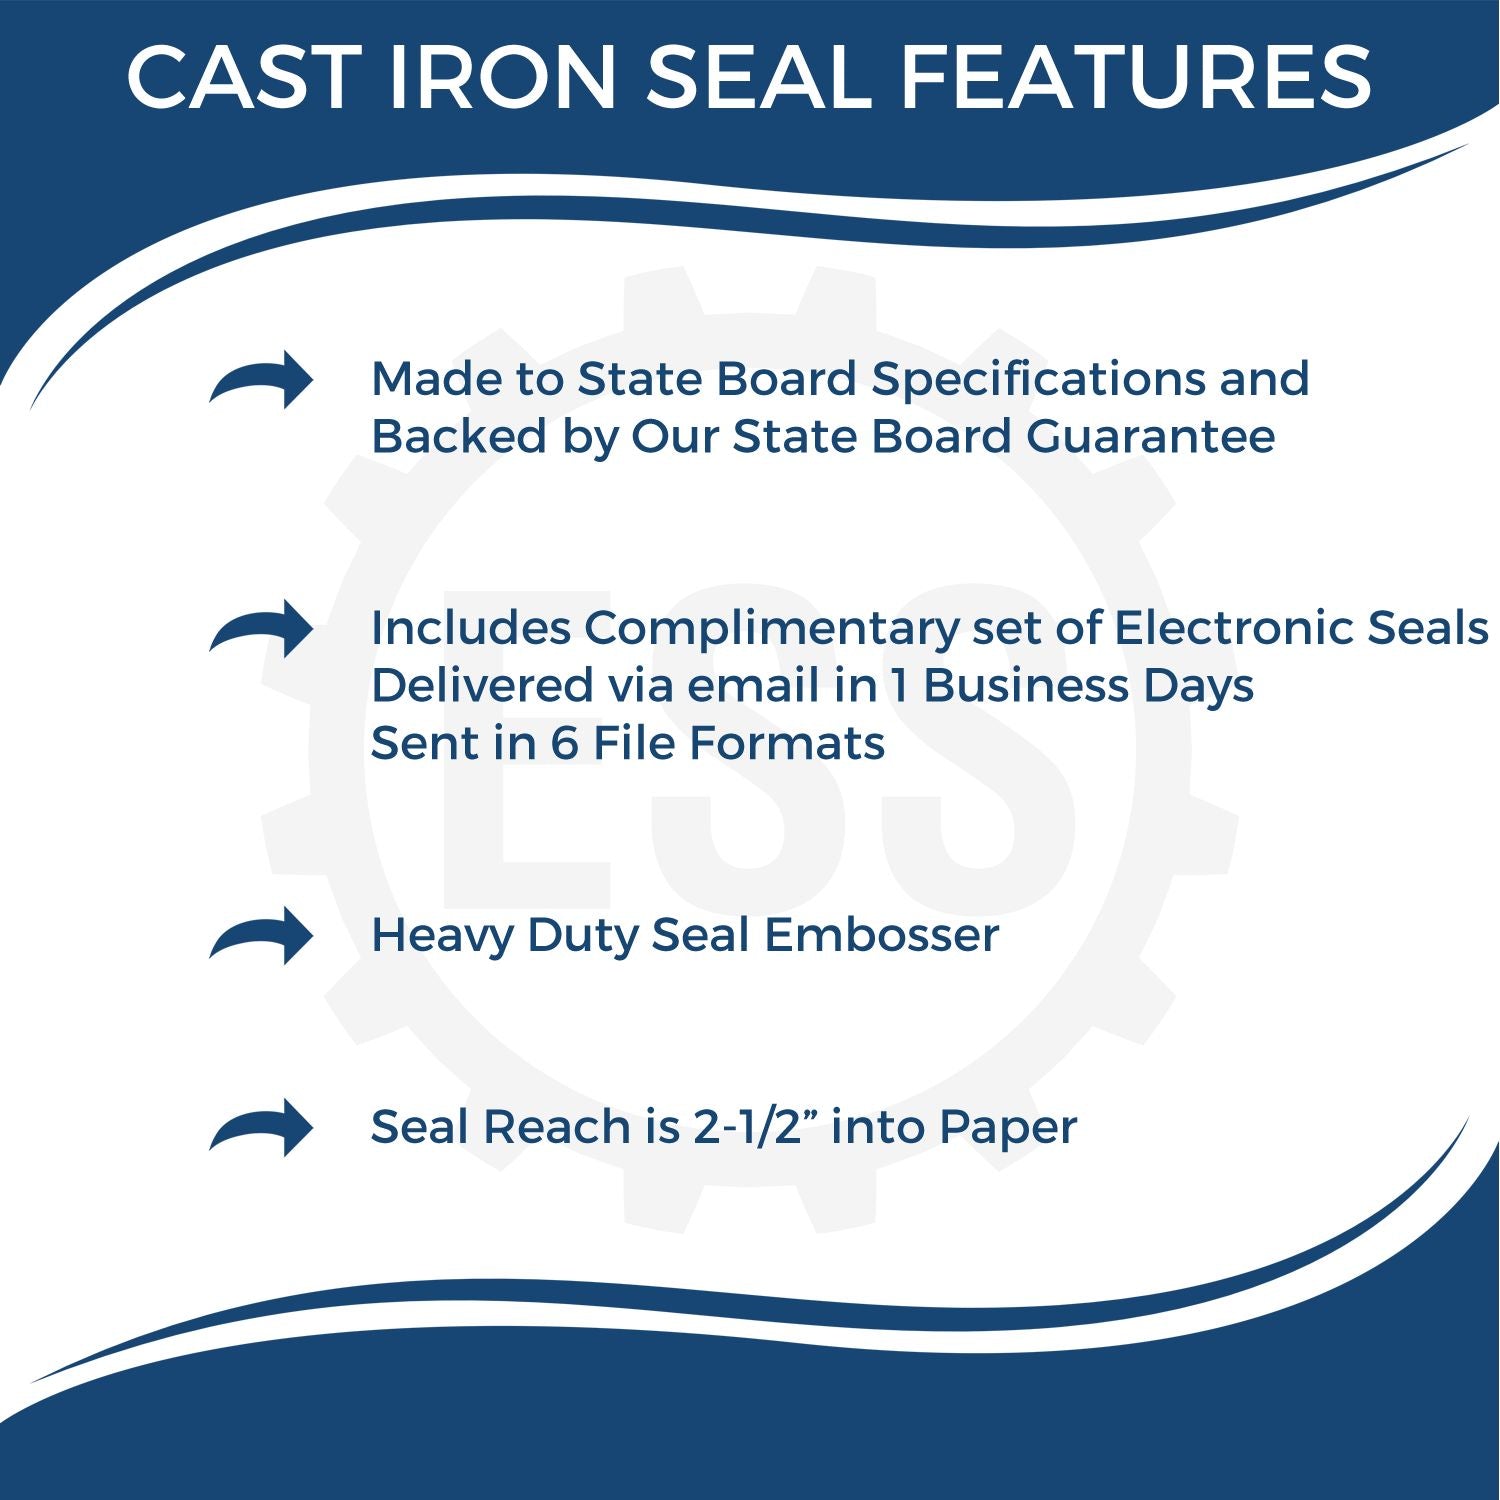 The main image for the Heavy Duty Cast Iron Ohio Engineer Seal Embosser depicting a sample of the imprint and electronic files